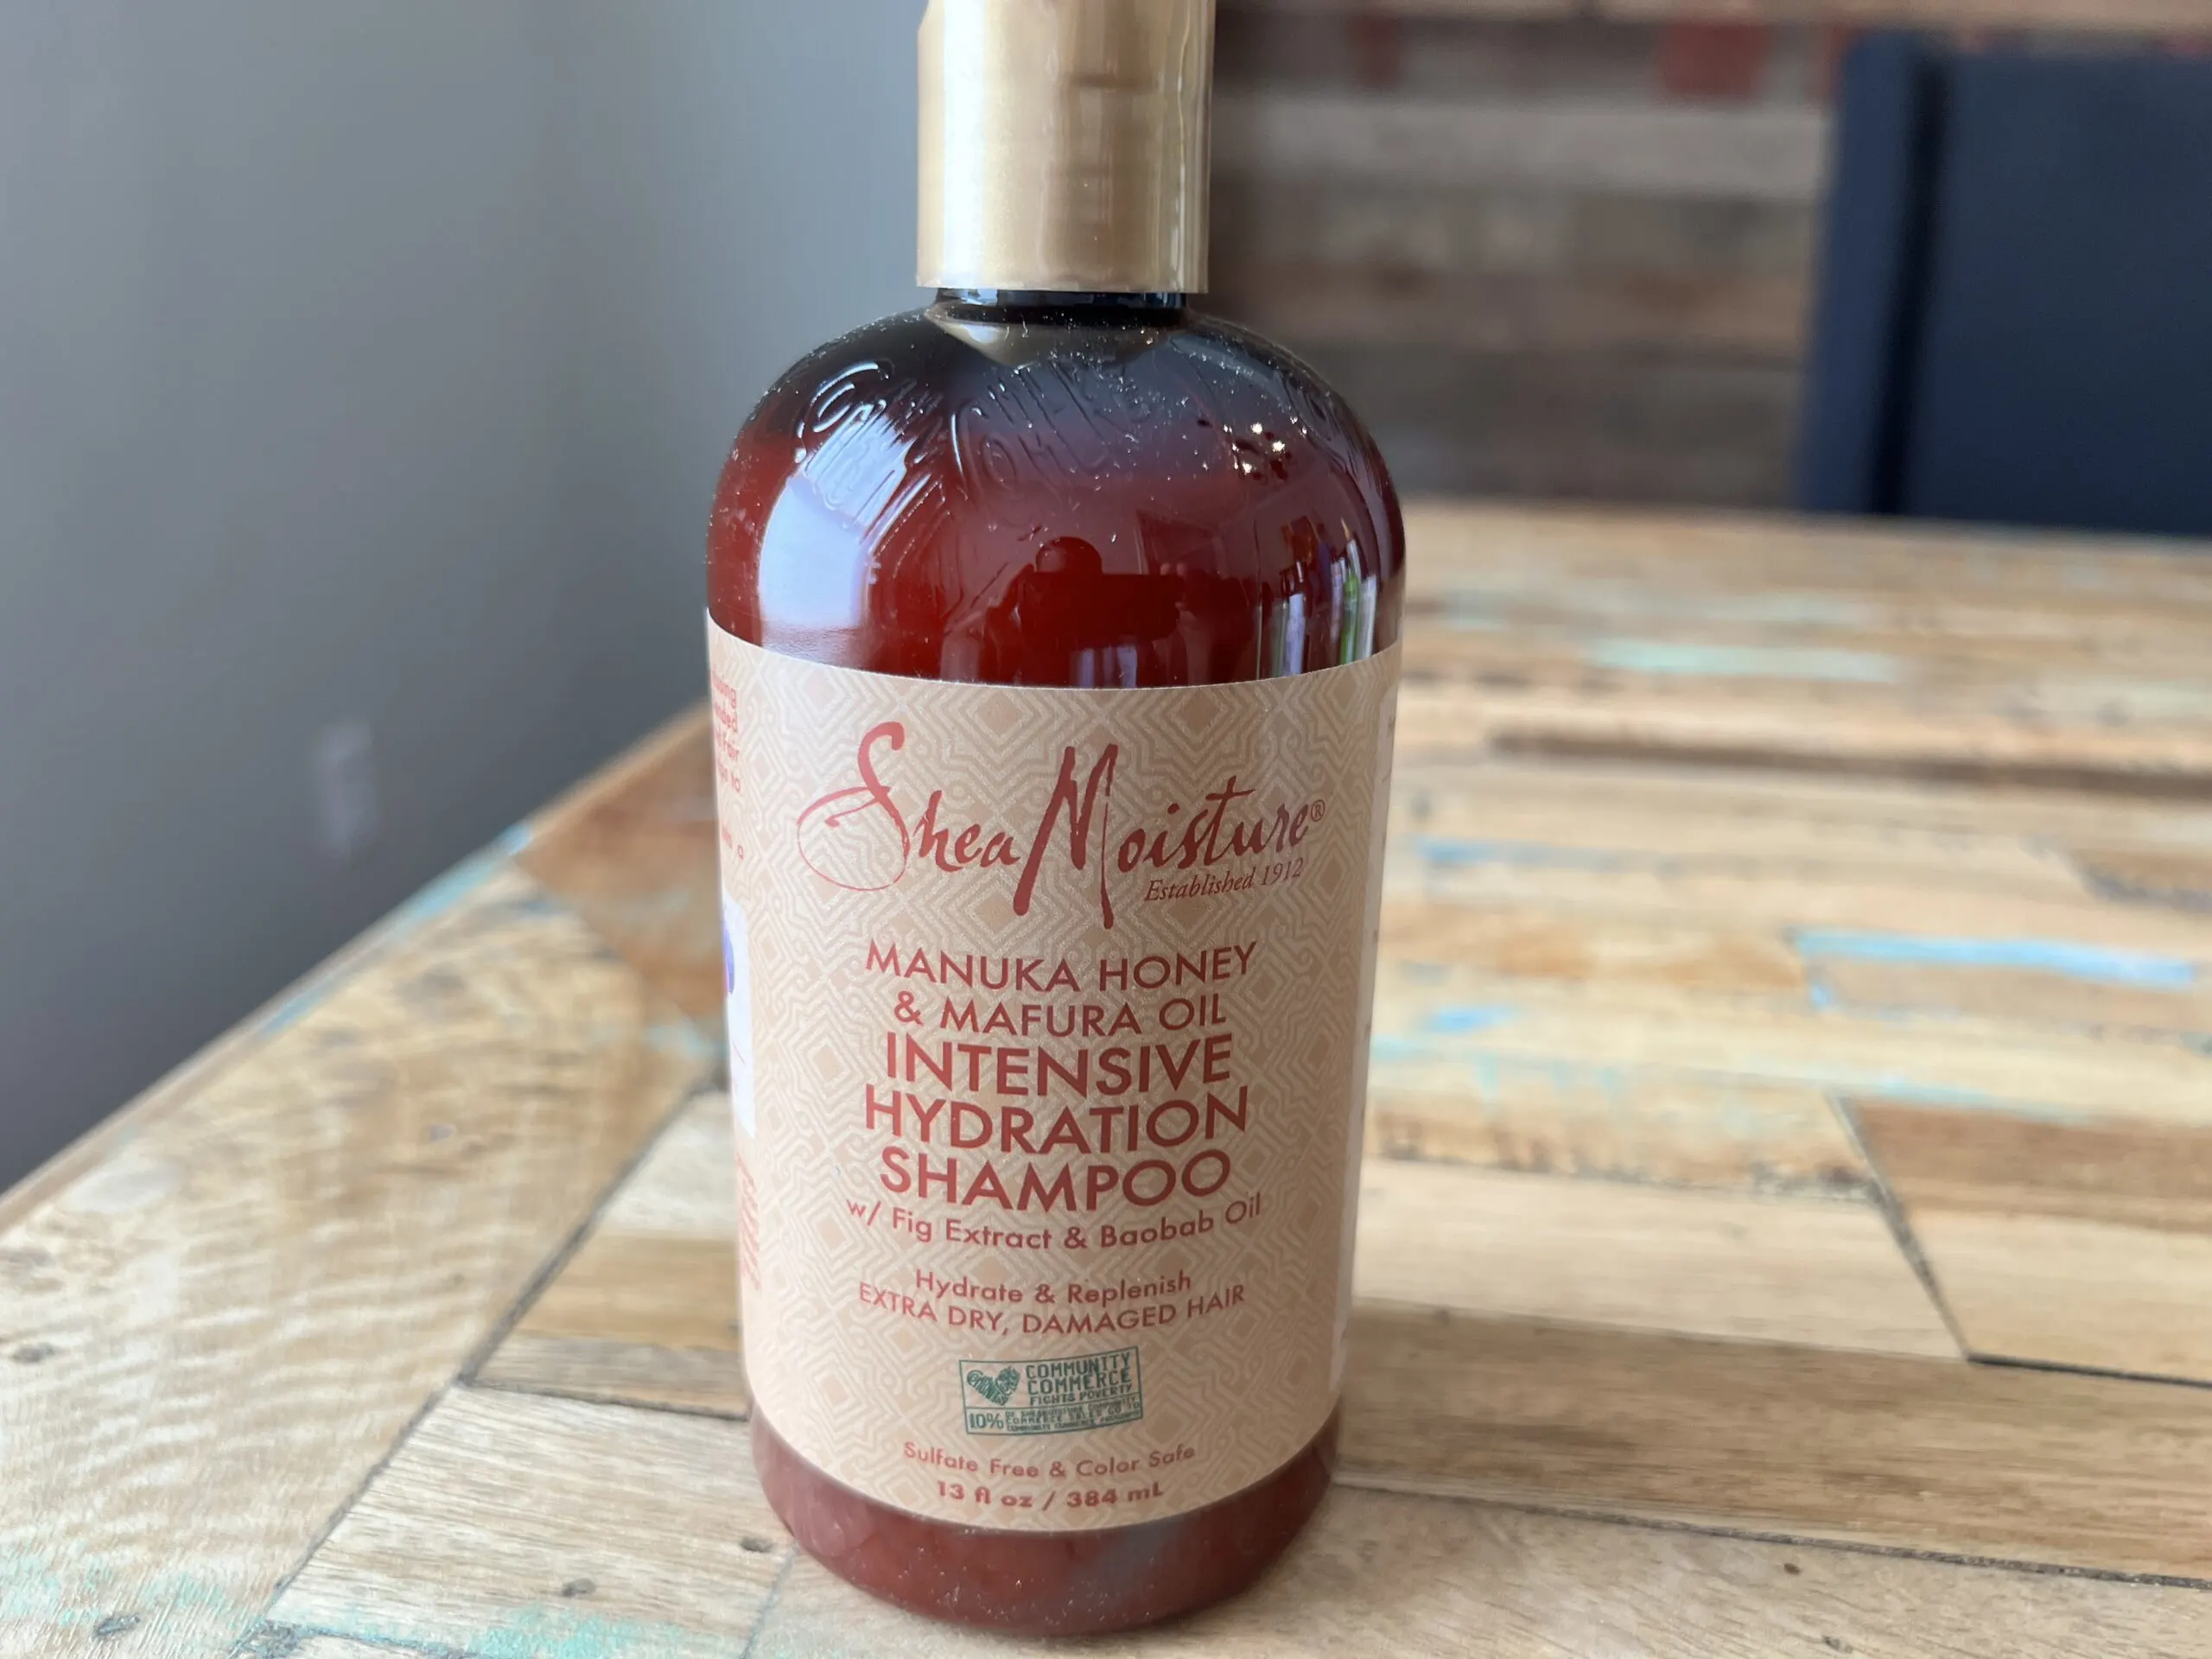 Shea Moisture: Manuka Honey & Mafura Oil Intensive Hydration Shampoo with fig extract and baobab oil designed to hydrate and replenish extra dry, damaged hair strands. 